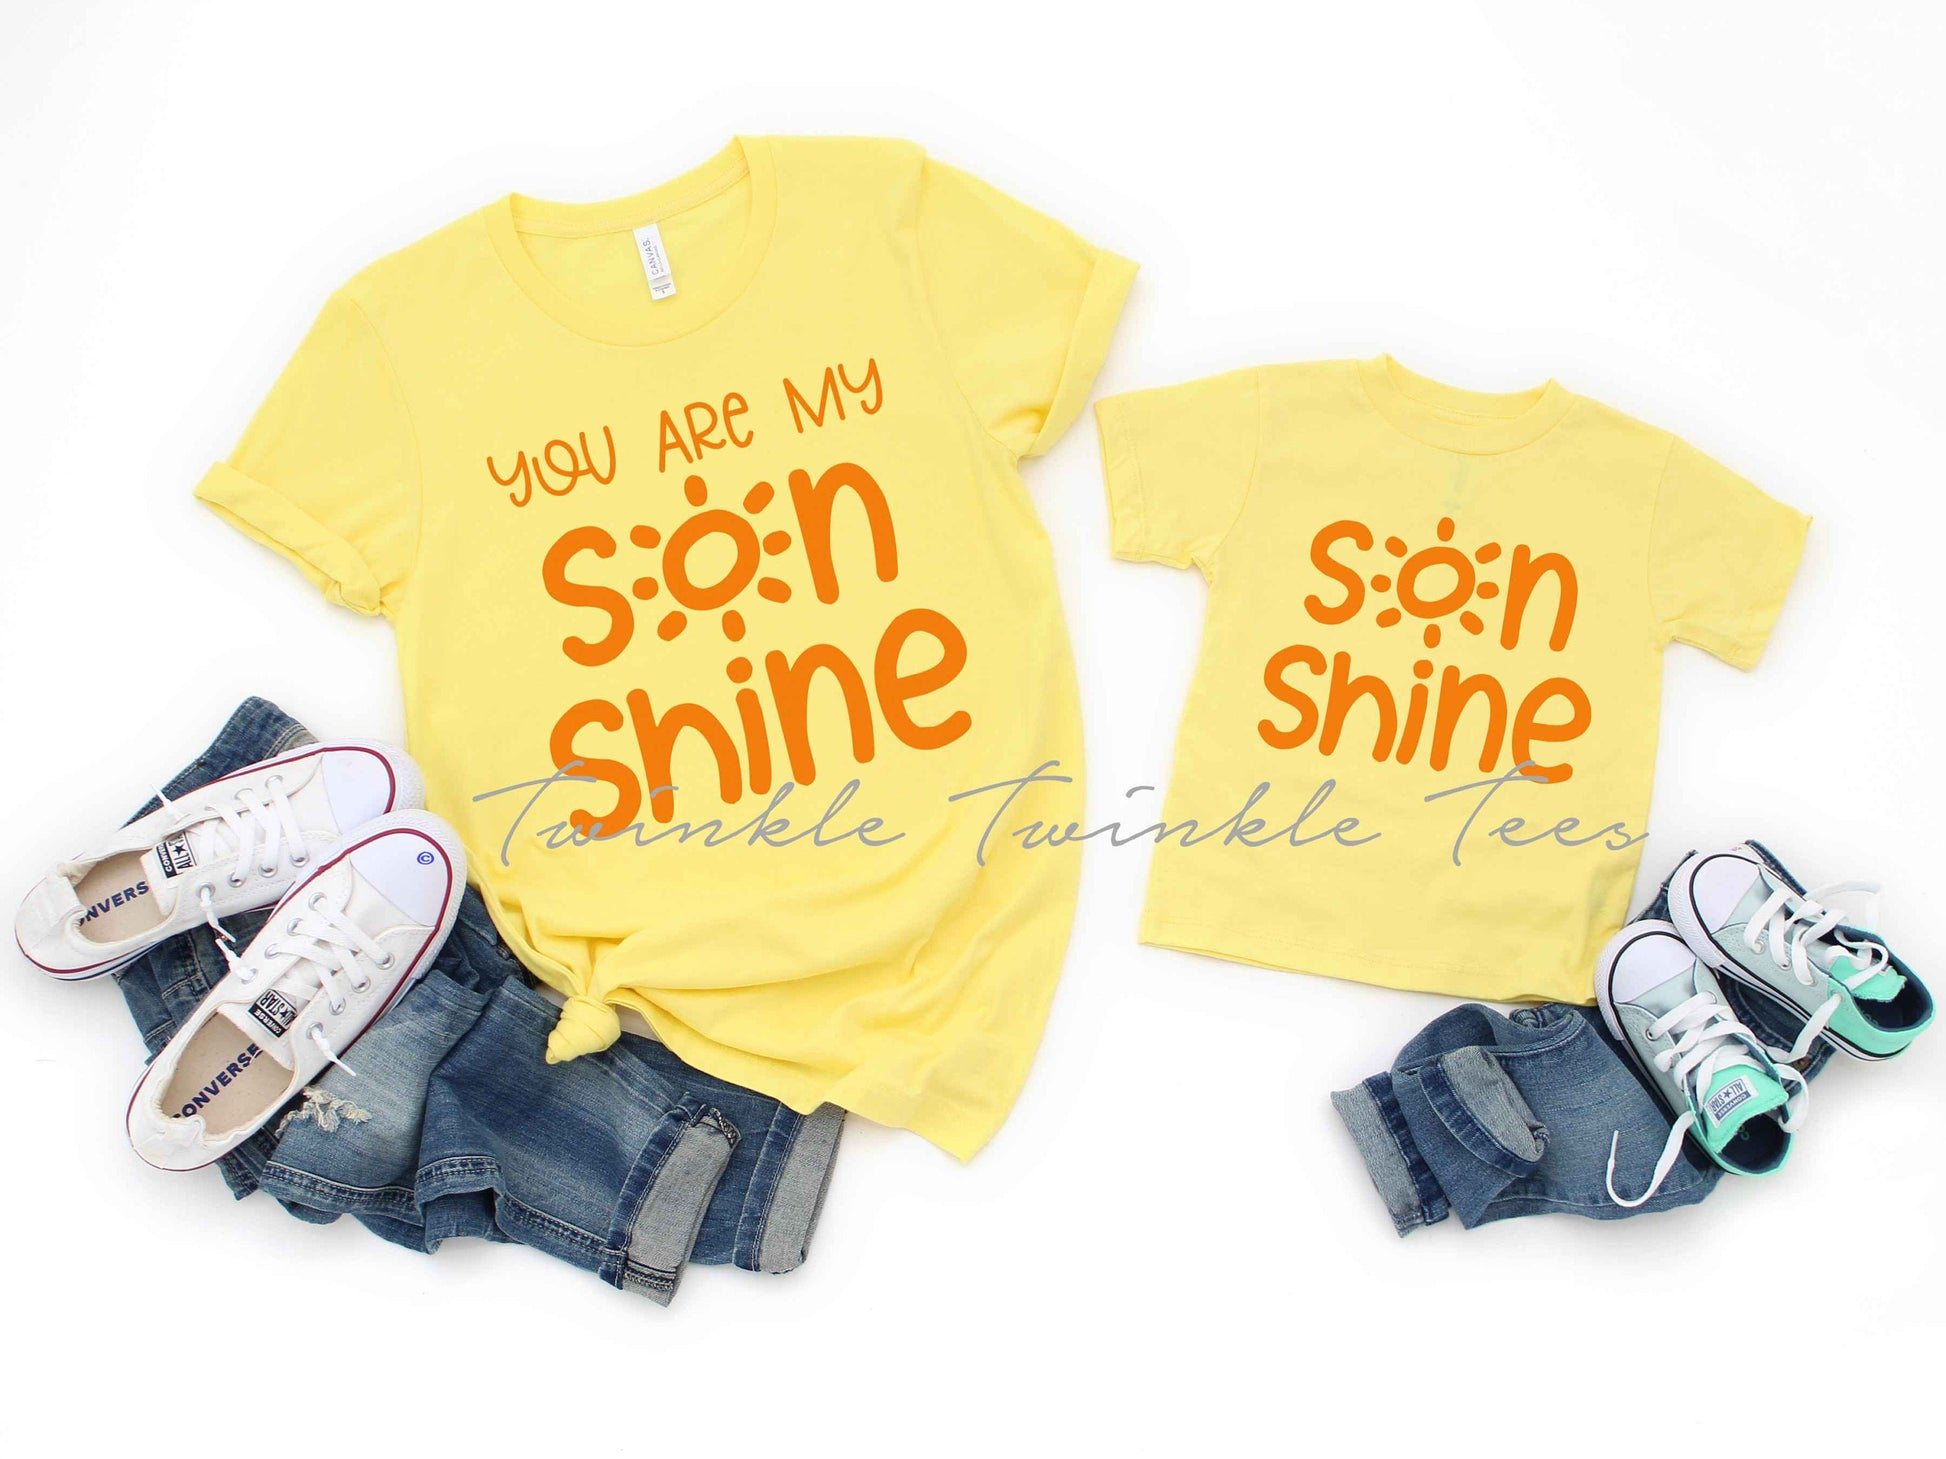 You are My SonShine and SonShine Unisex Matching t-shirts - Mommy and Me Shirts - Gift for Mom - Mommy and Son Shirts - Mother's Day Shirts